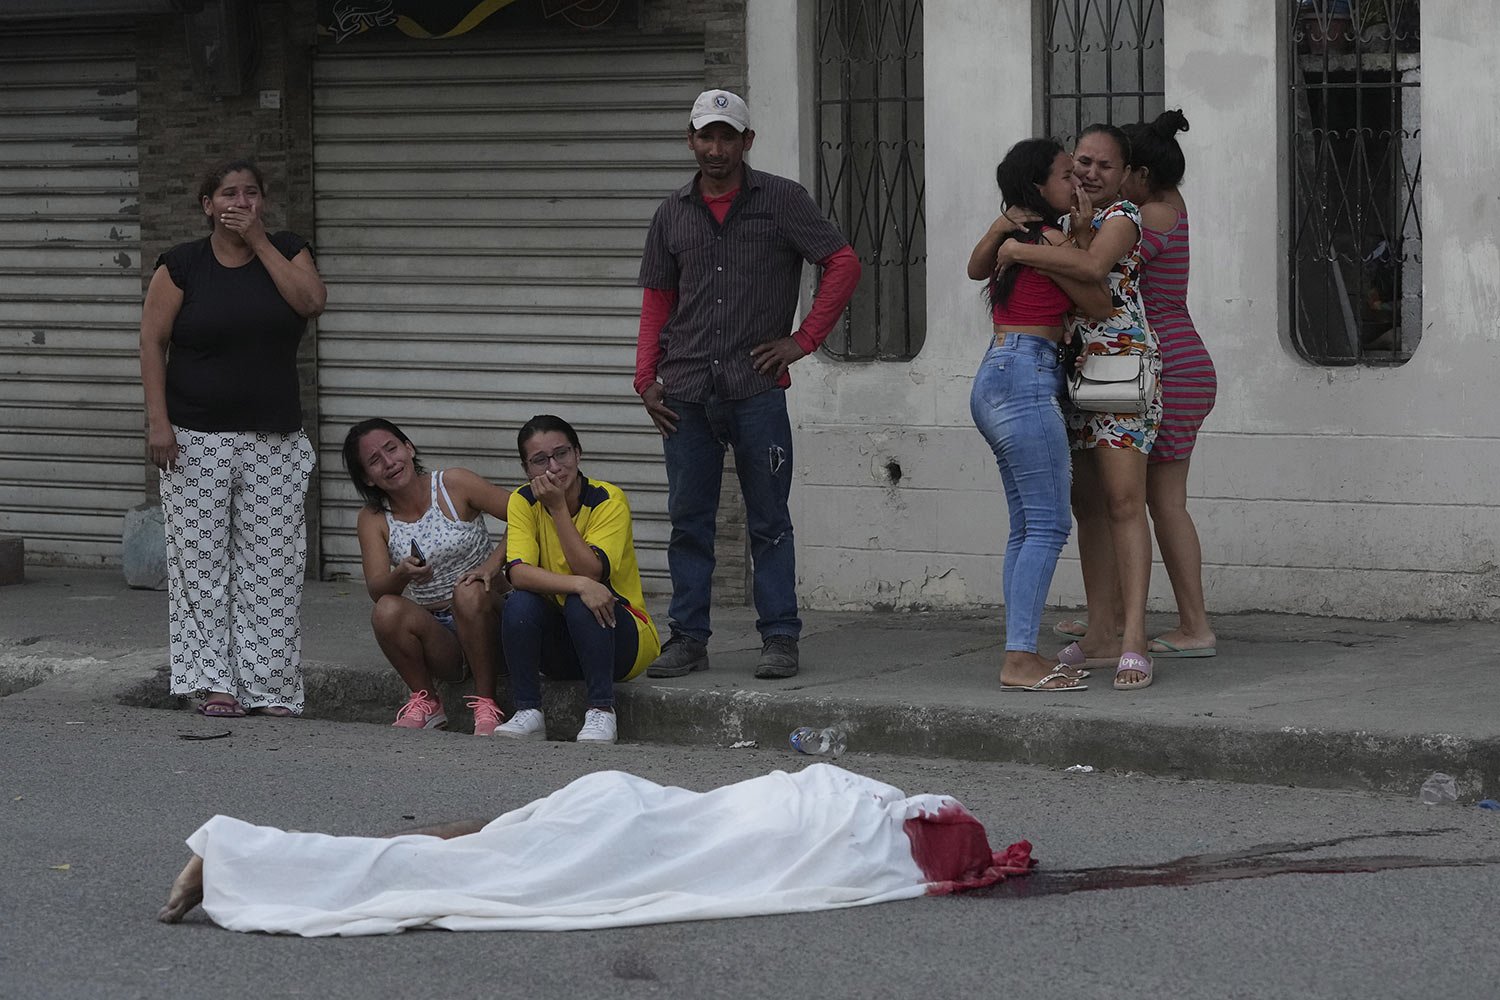  Persons grieve near the body of a man, killed in unknown circumstances, on a street in Duran, Ecuador, July 21, 2023, amid a serious outbreak of violence that authorities attribute to disputes among organized crime groups.  (AP Photo/Dolores Ochoa) 